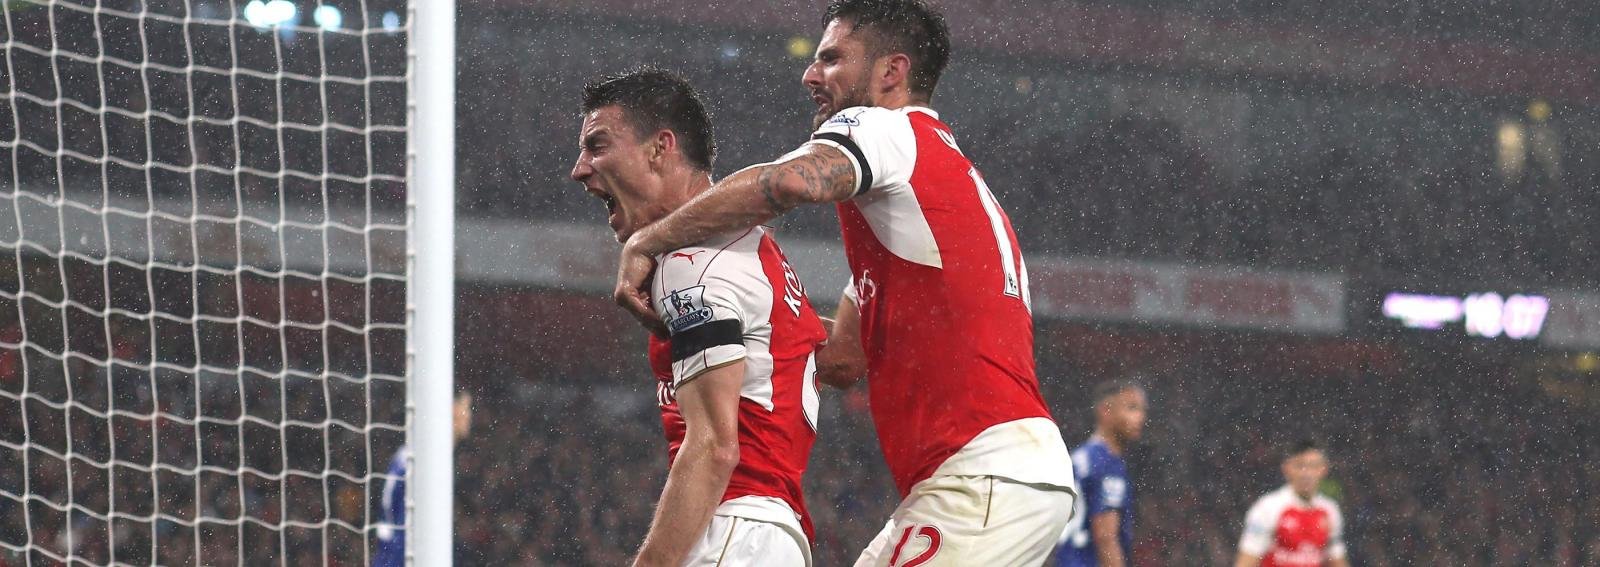 Round-up: Arsenal go joint top after Manchester derby ends in drab draw